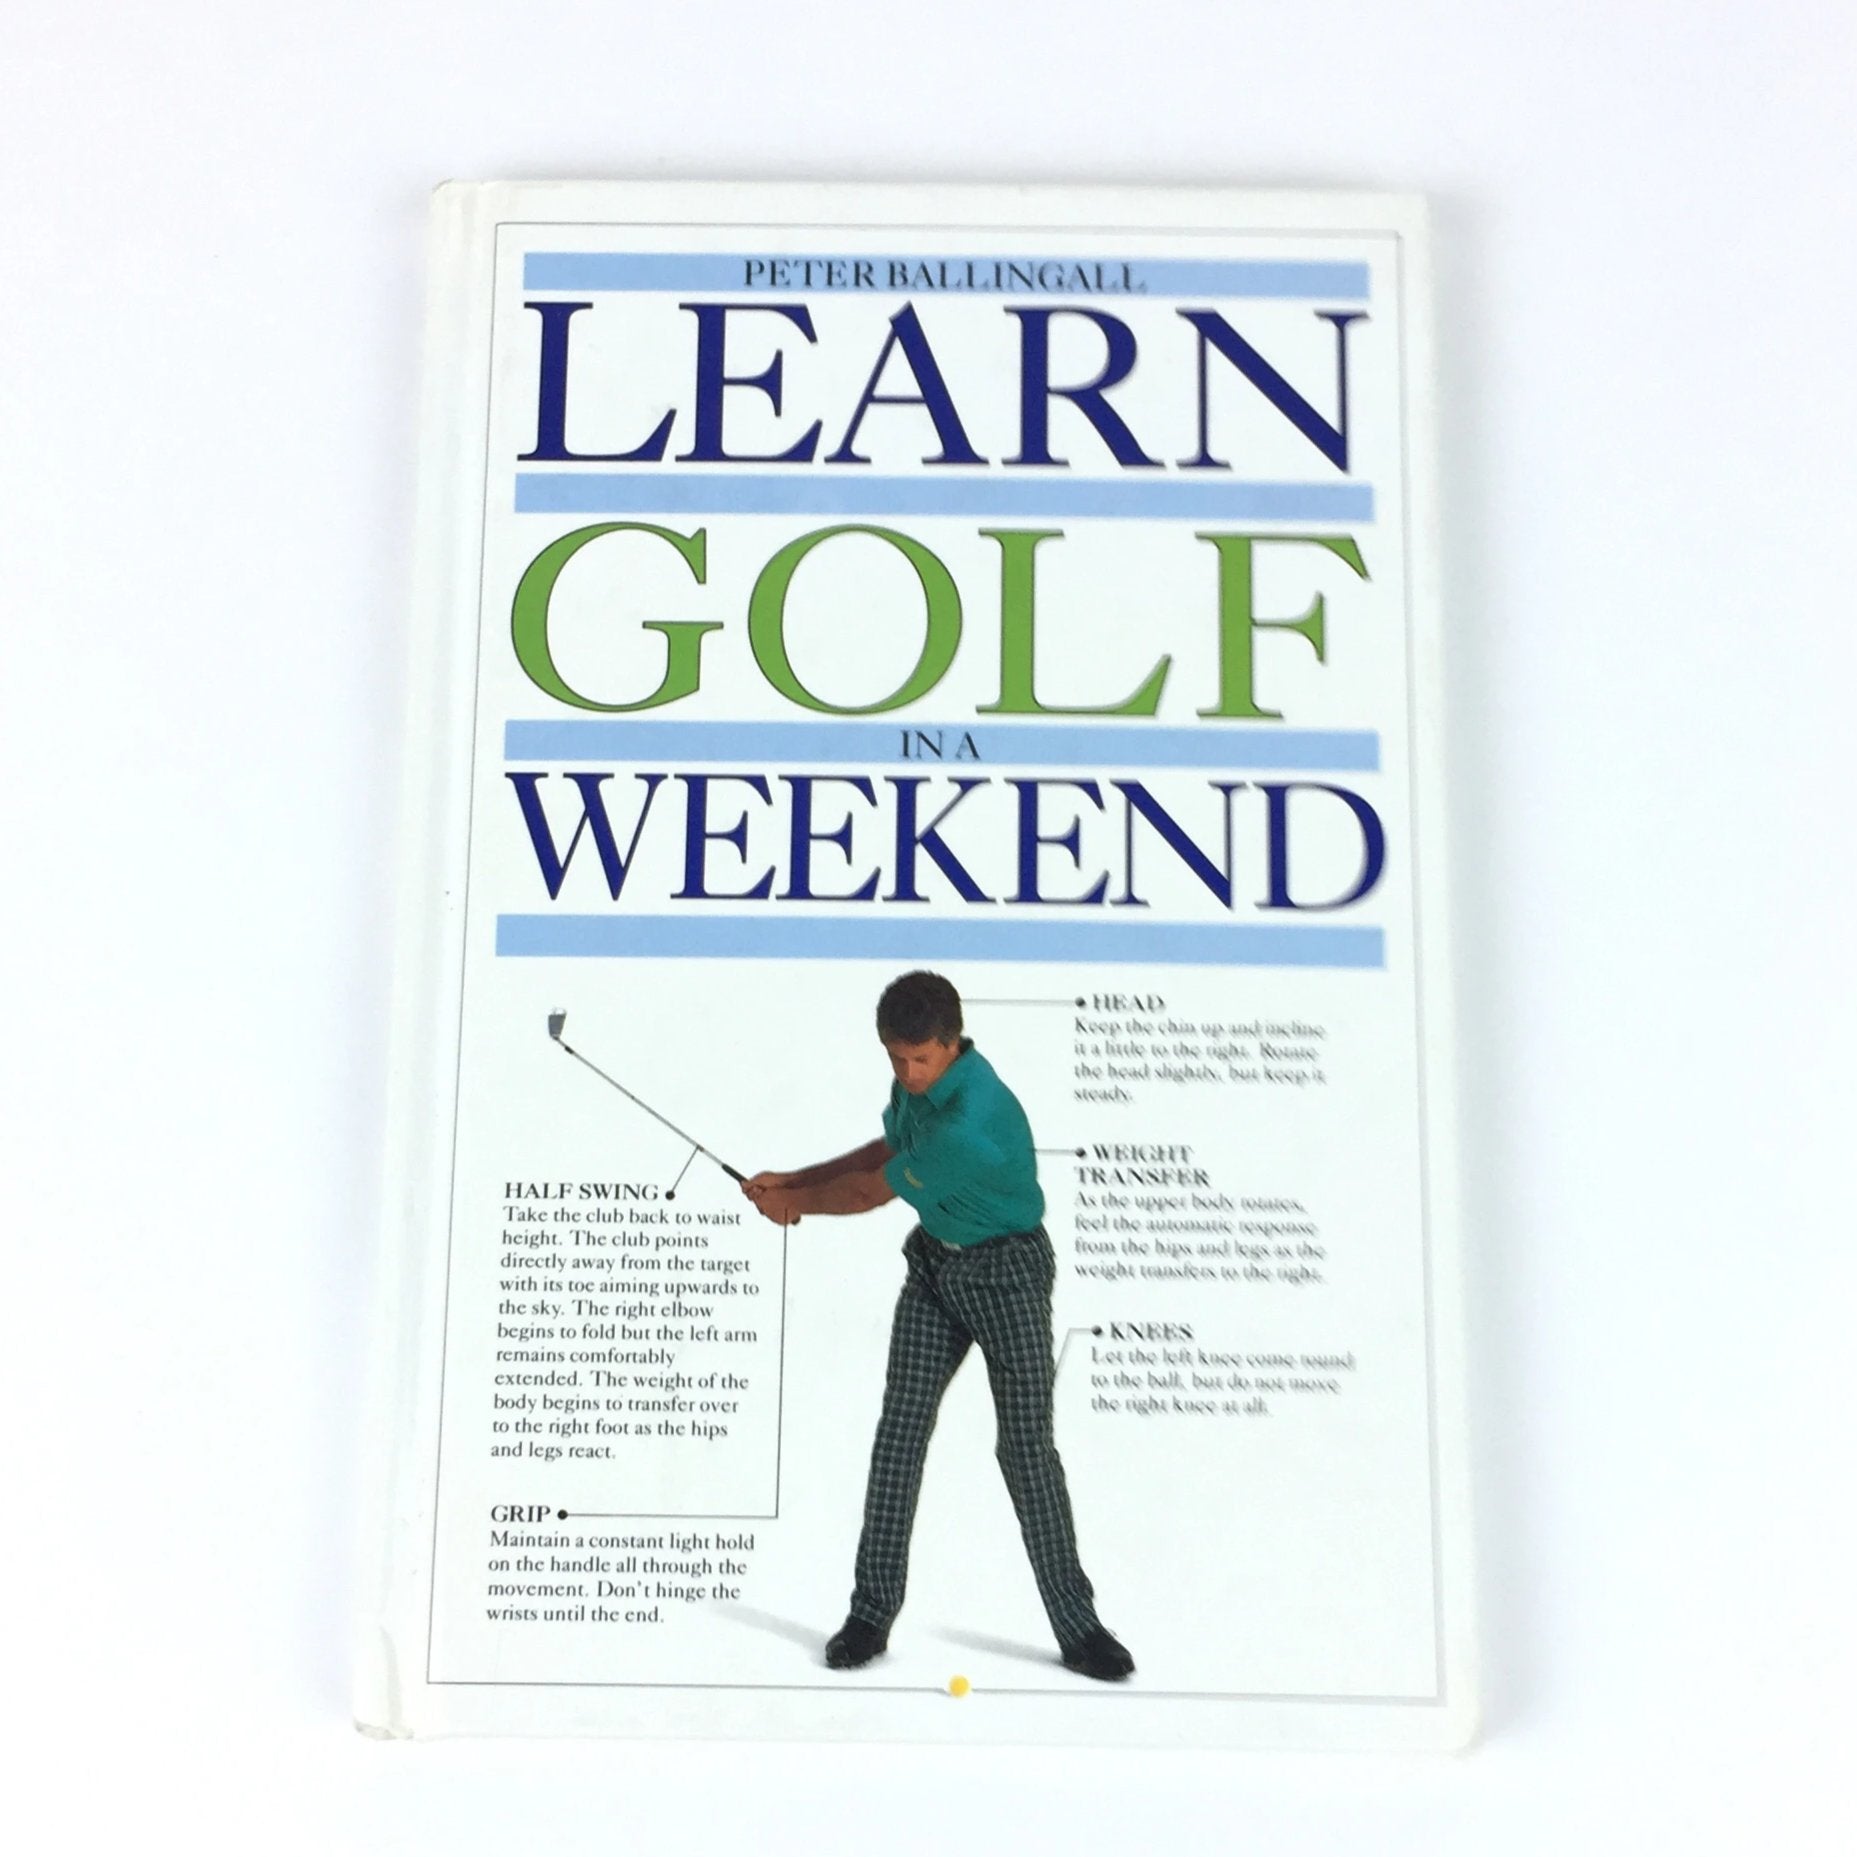 Learn Golf in a Weekend by Peter Ballingall